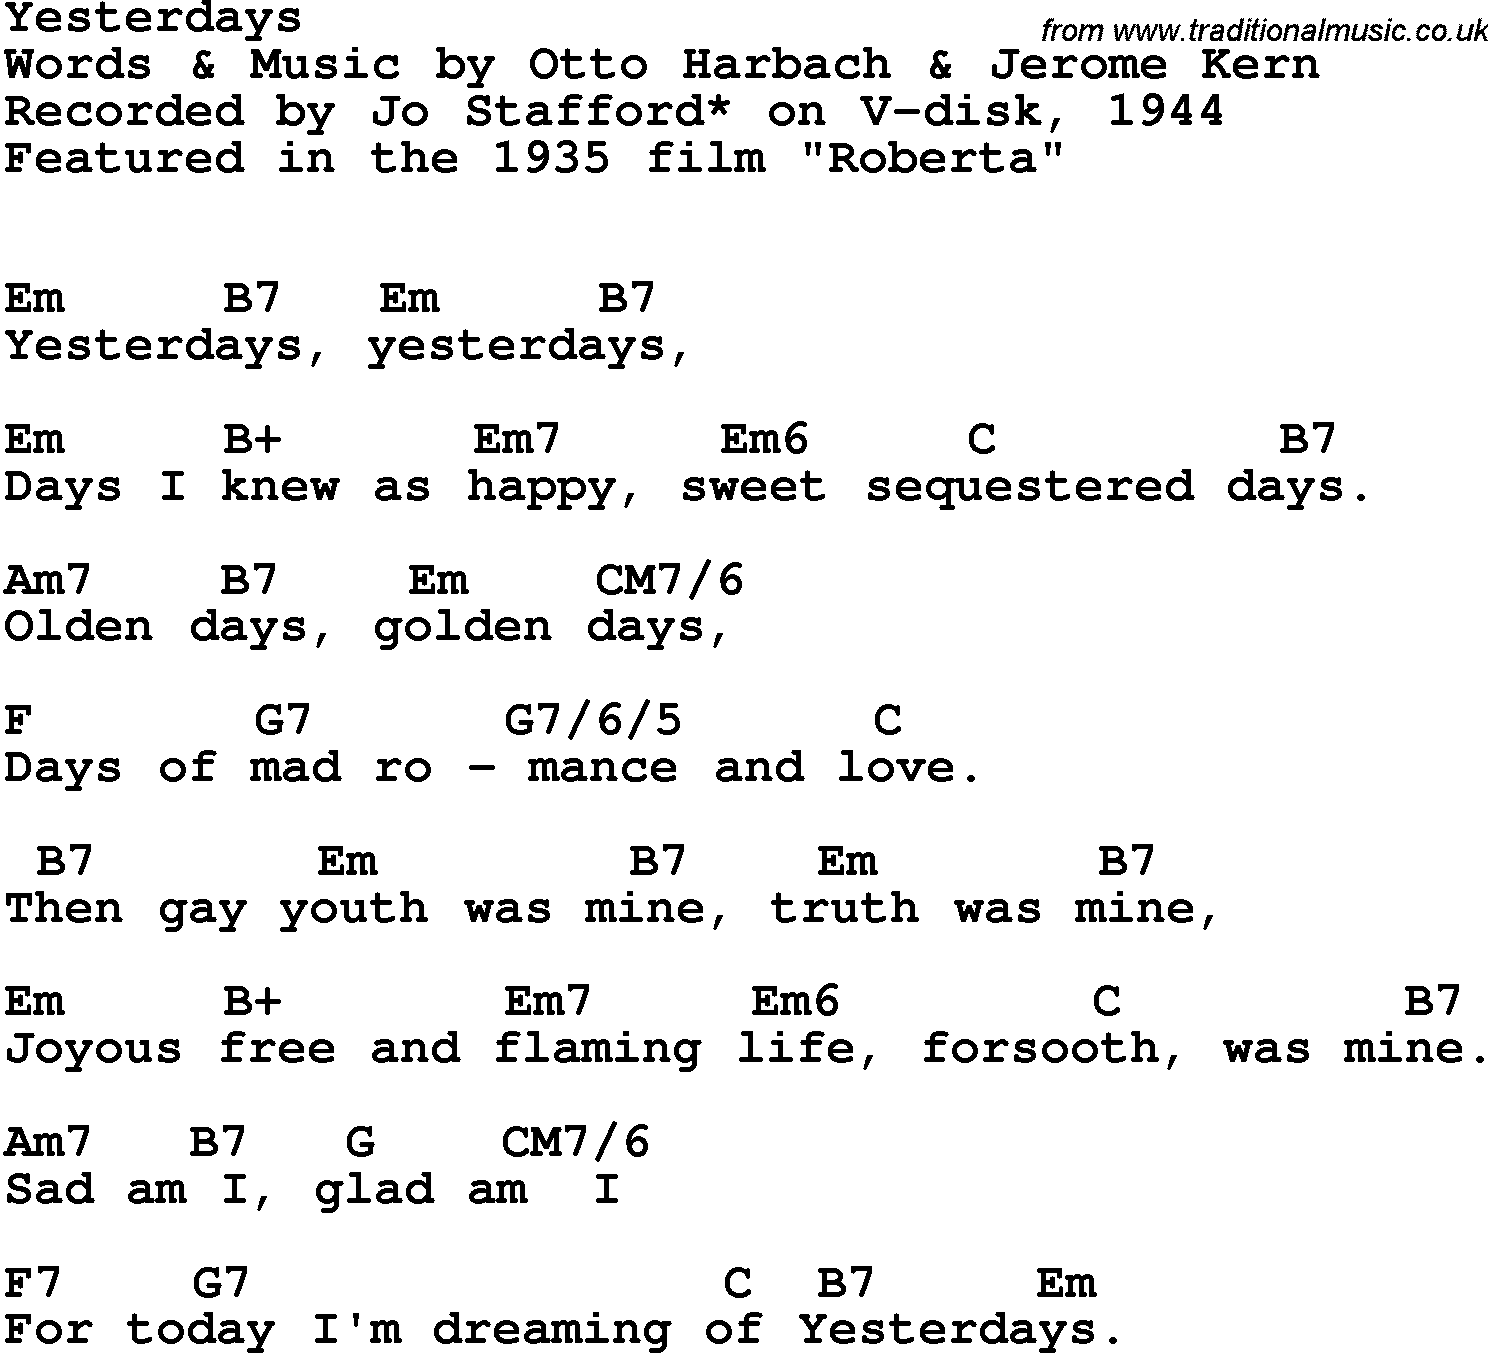 Song Lyrics with guitar chords for Yesterdays - Jo Stafford, 1944